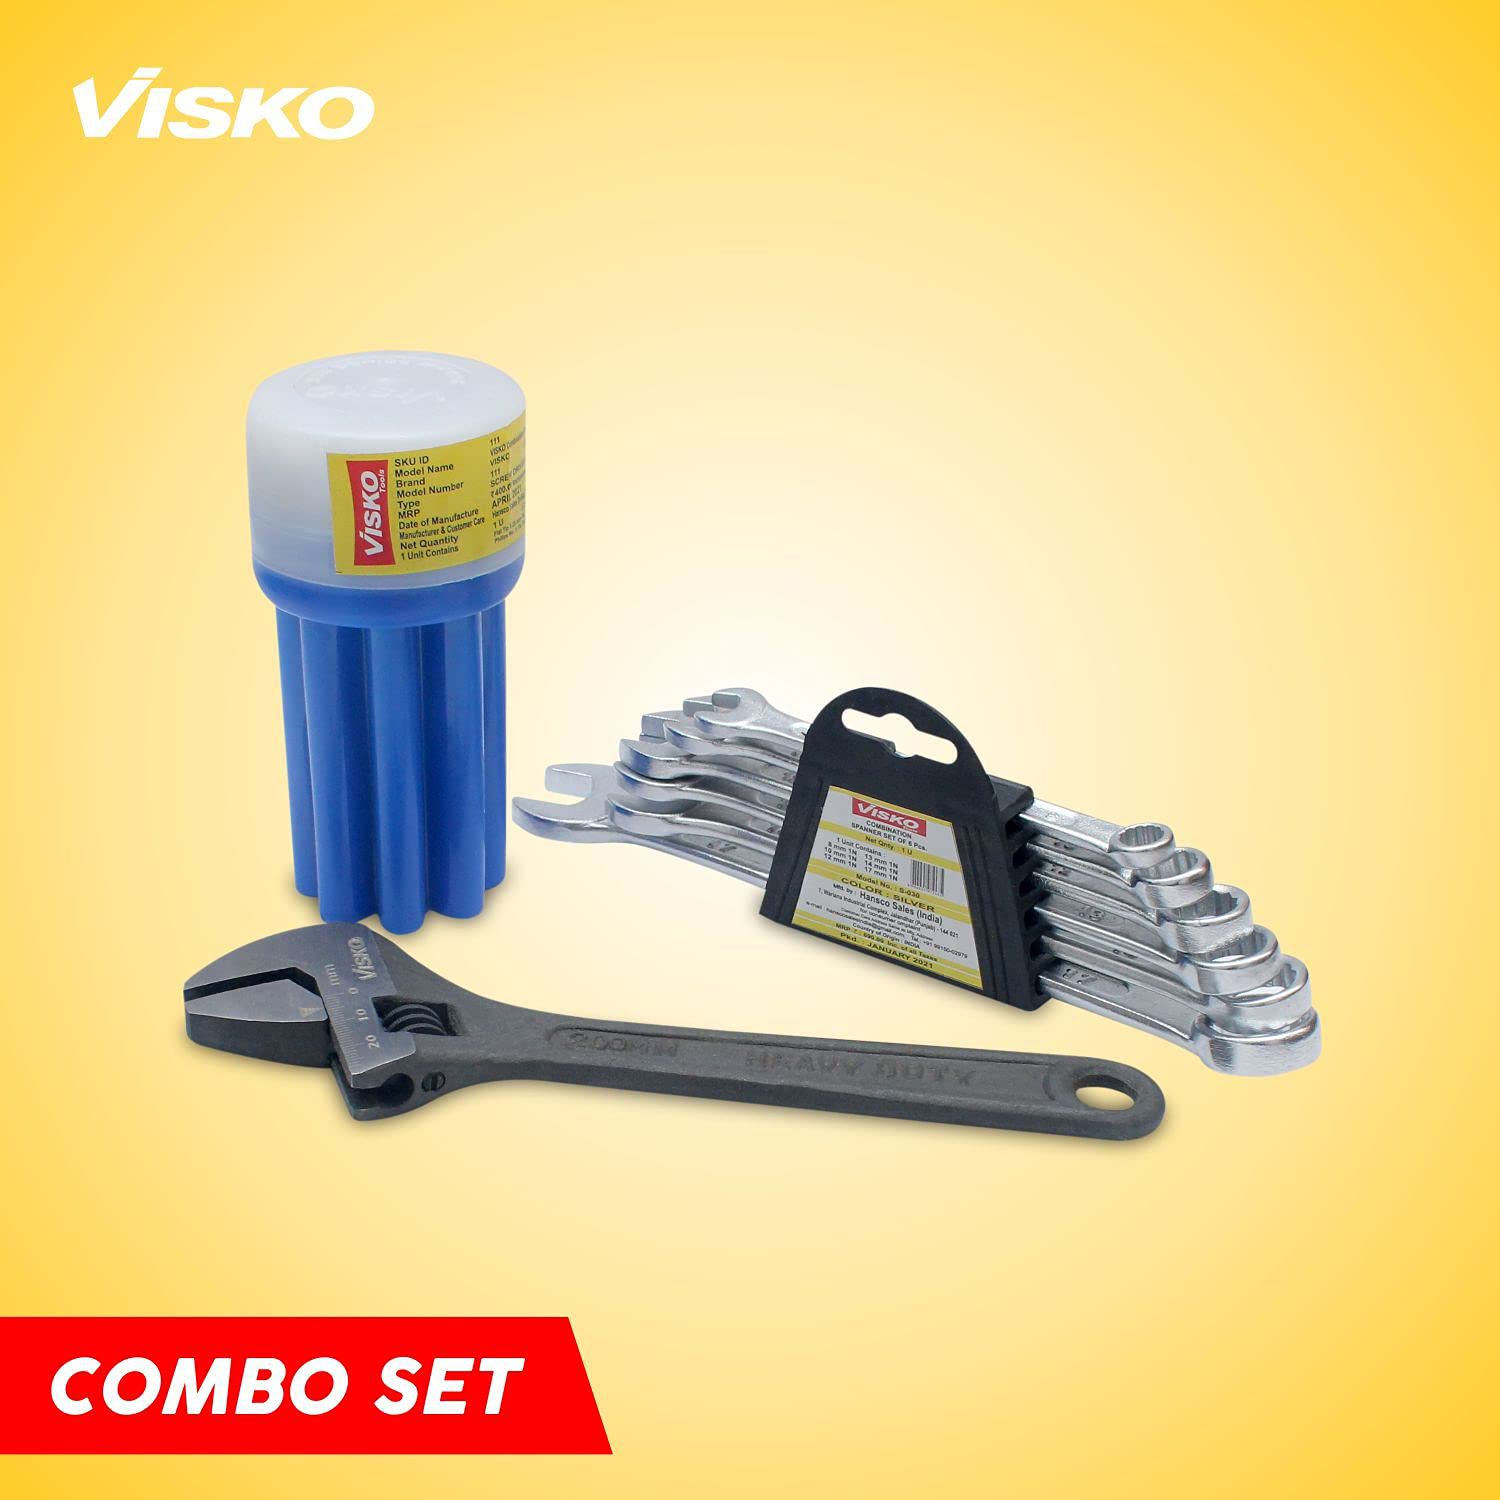 Visko Hand Tools Combo , 815 Tools Combo With 331 Phosphate Finish Single Sided Open End Wrench ,111 8 Blades Combination Screwdriver Set with Tester (9-Pieces) and S027 Recessed Panel Double Sided Combination Wrench (Pack of 6)